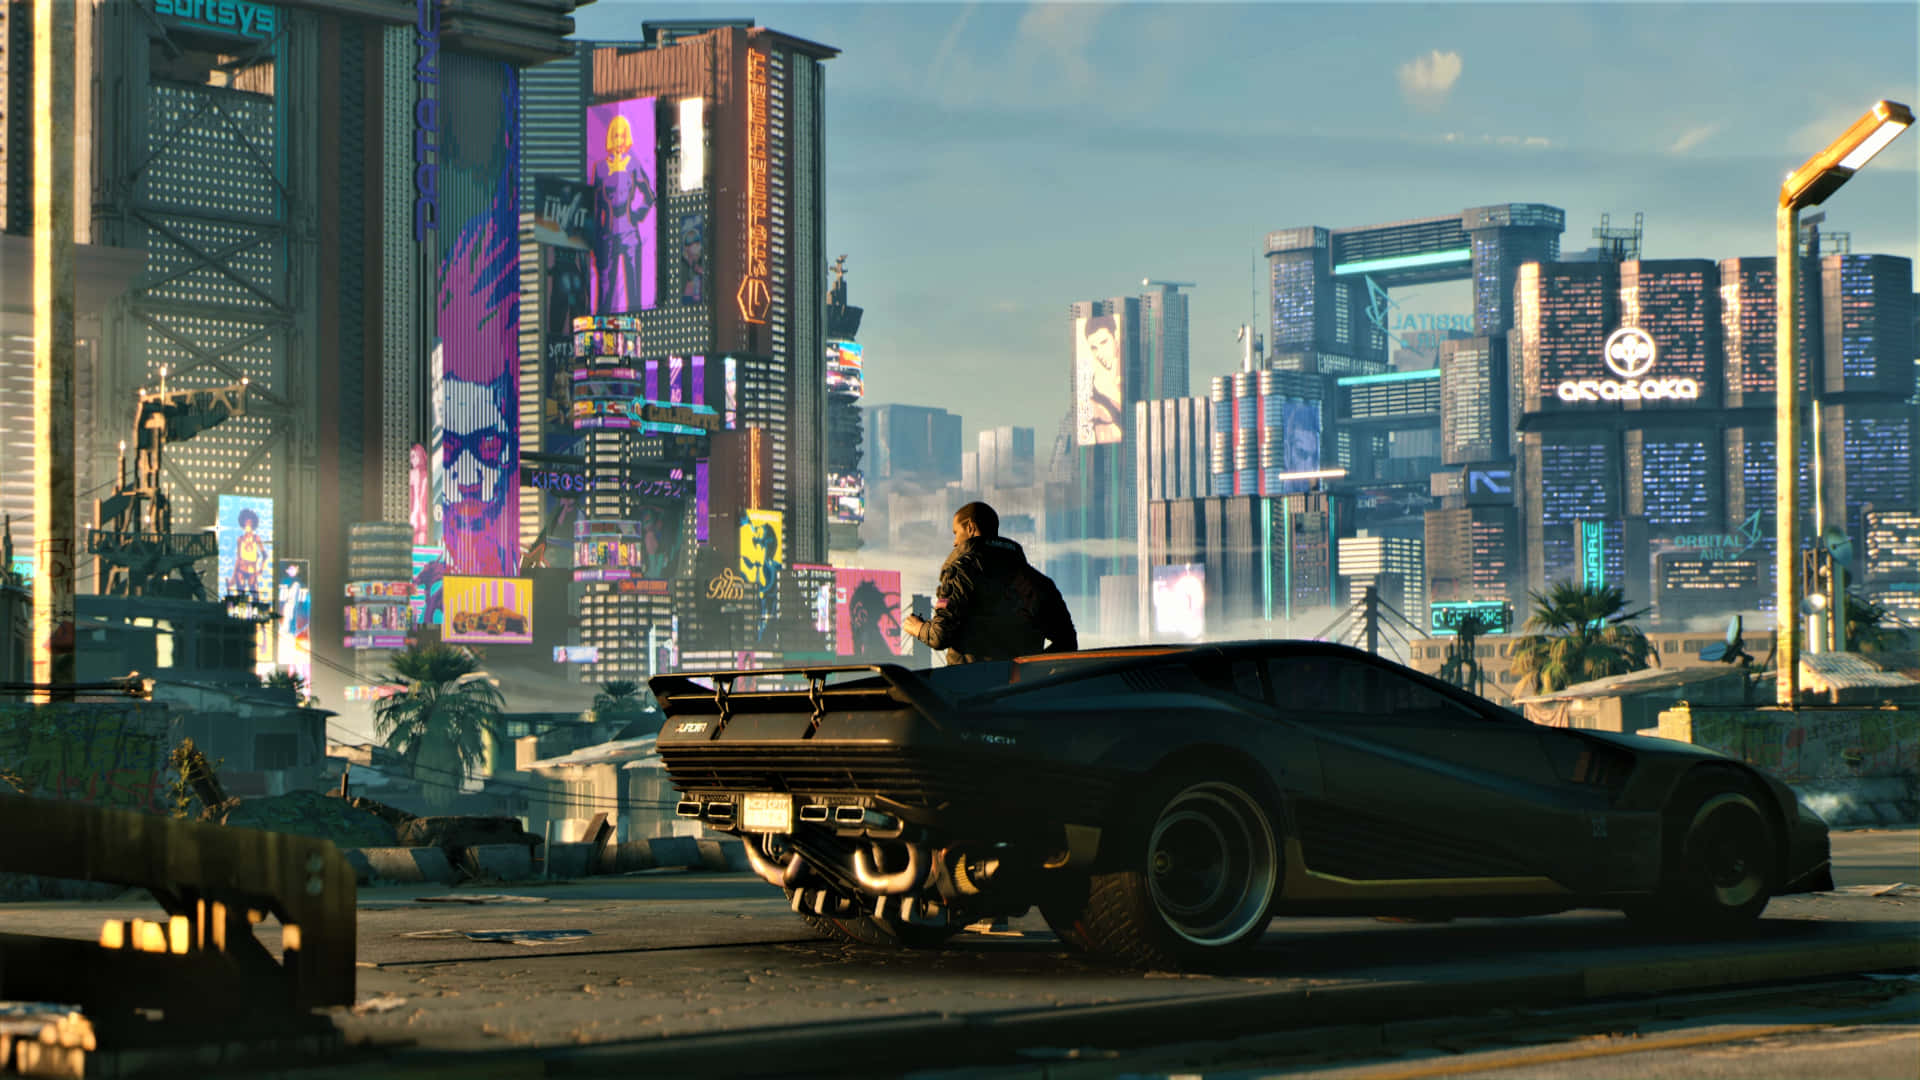 Let your journey in the futuristic world of Cyberpunk 2077 begin